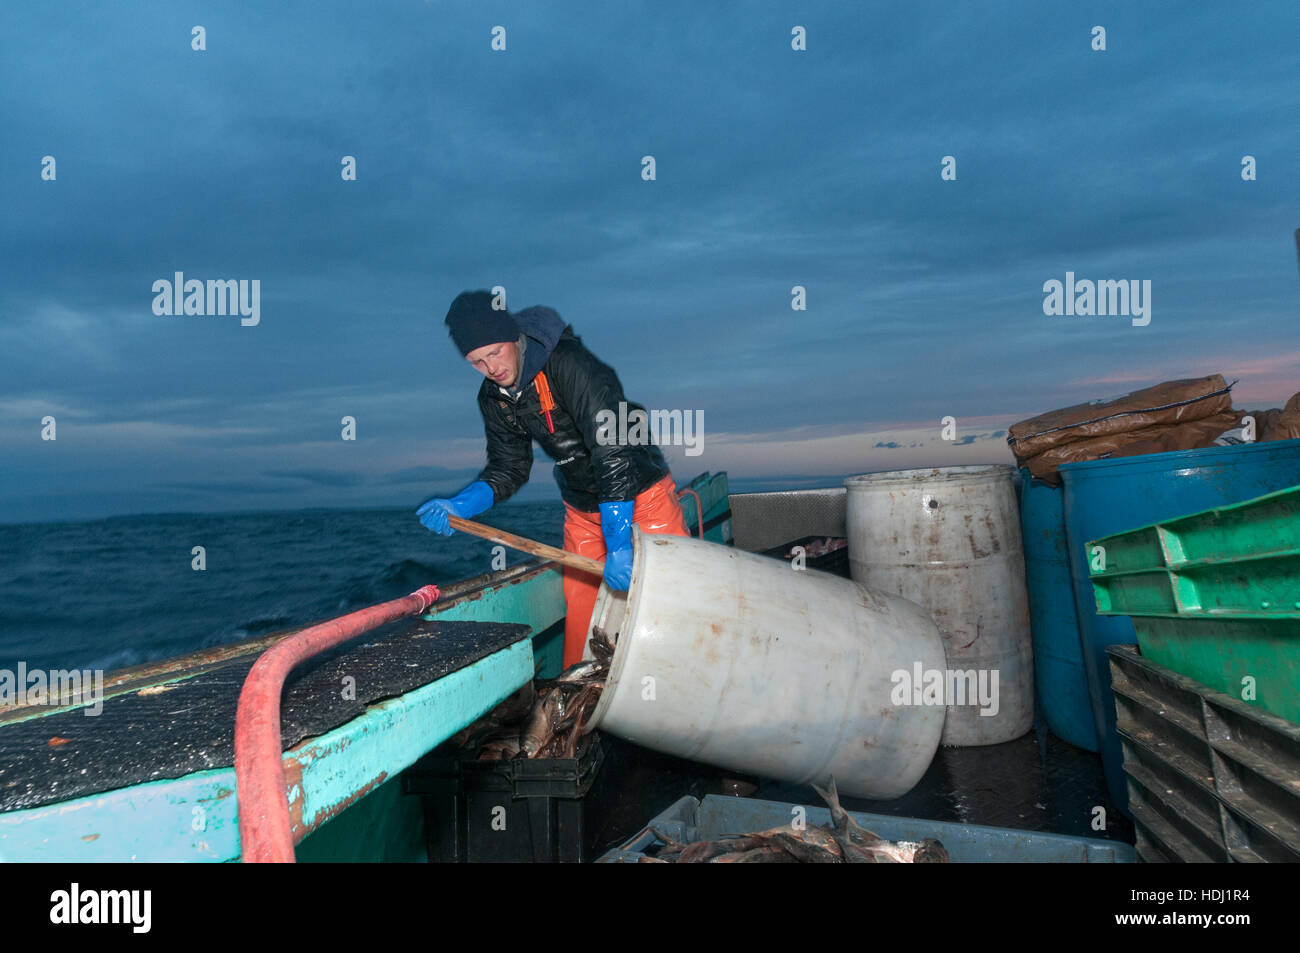 Sternman on lobster boat prepares bait (menhaden), Yarmouth Stock Photo